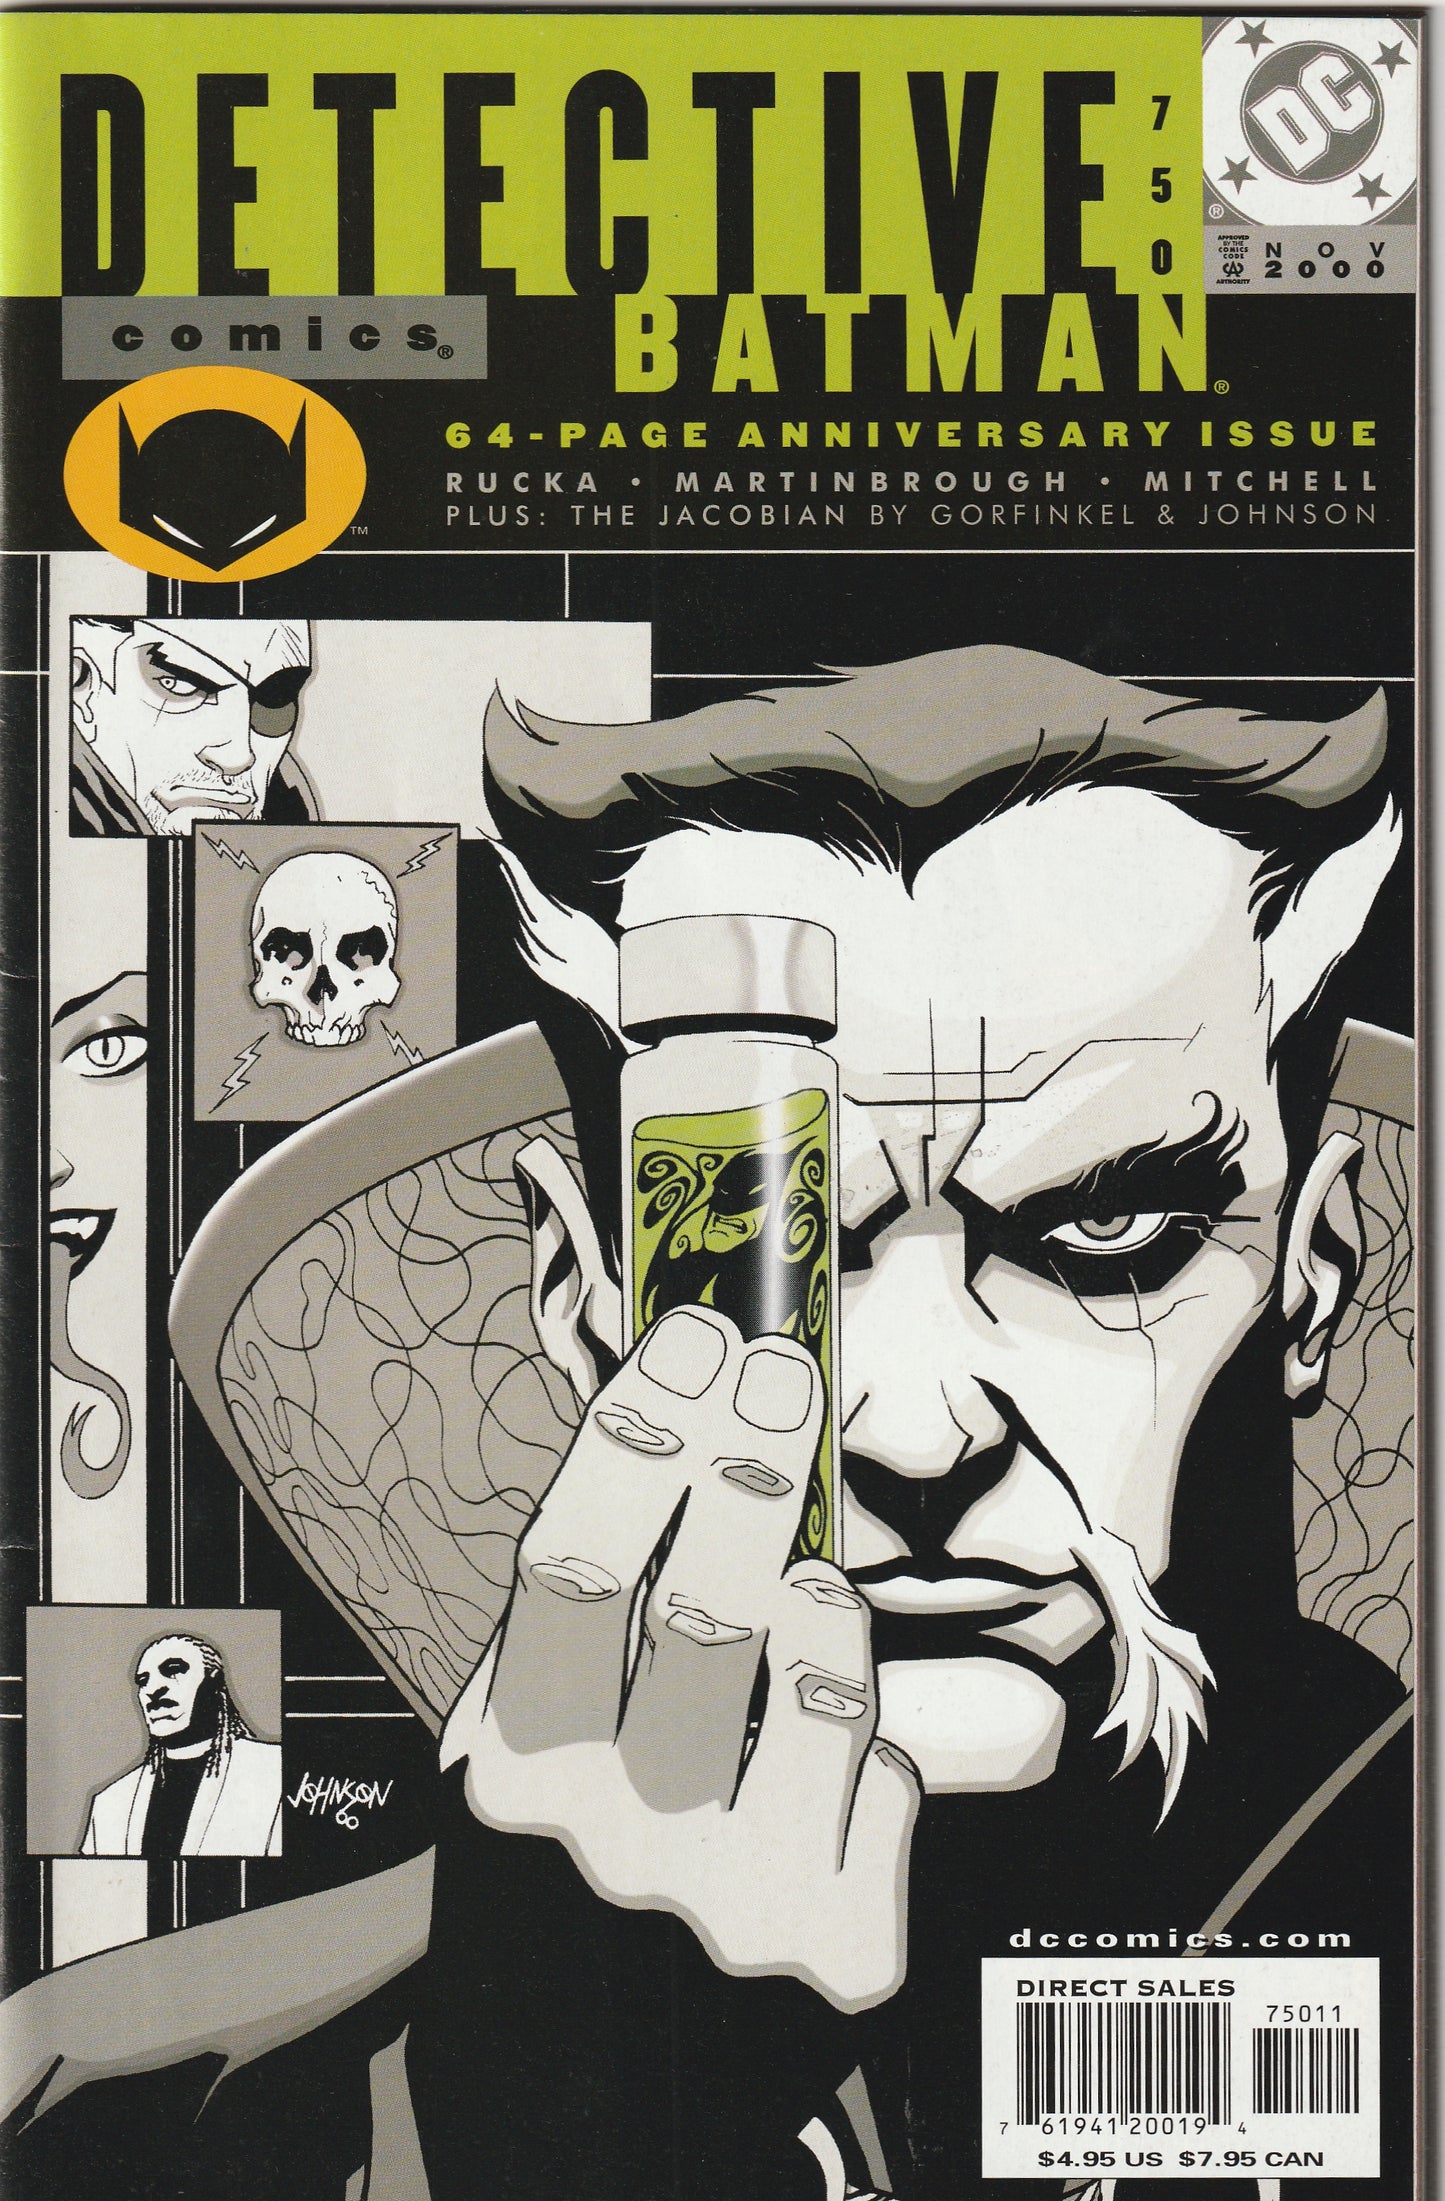 Detective Comics #750 (2000) - 64 Page Anniversary issue